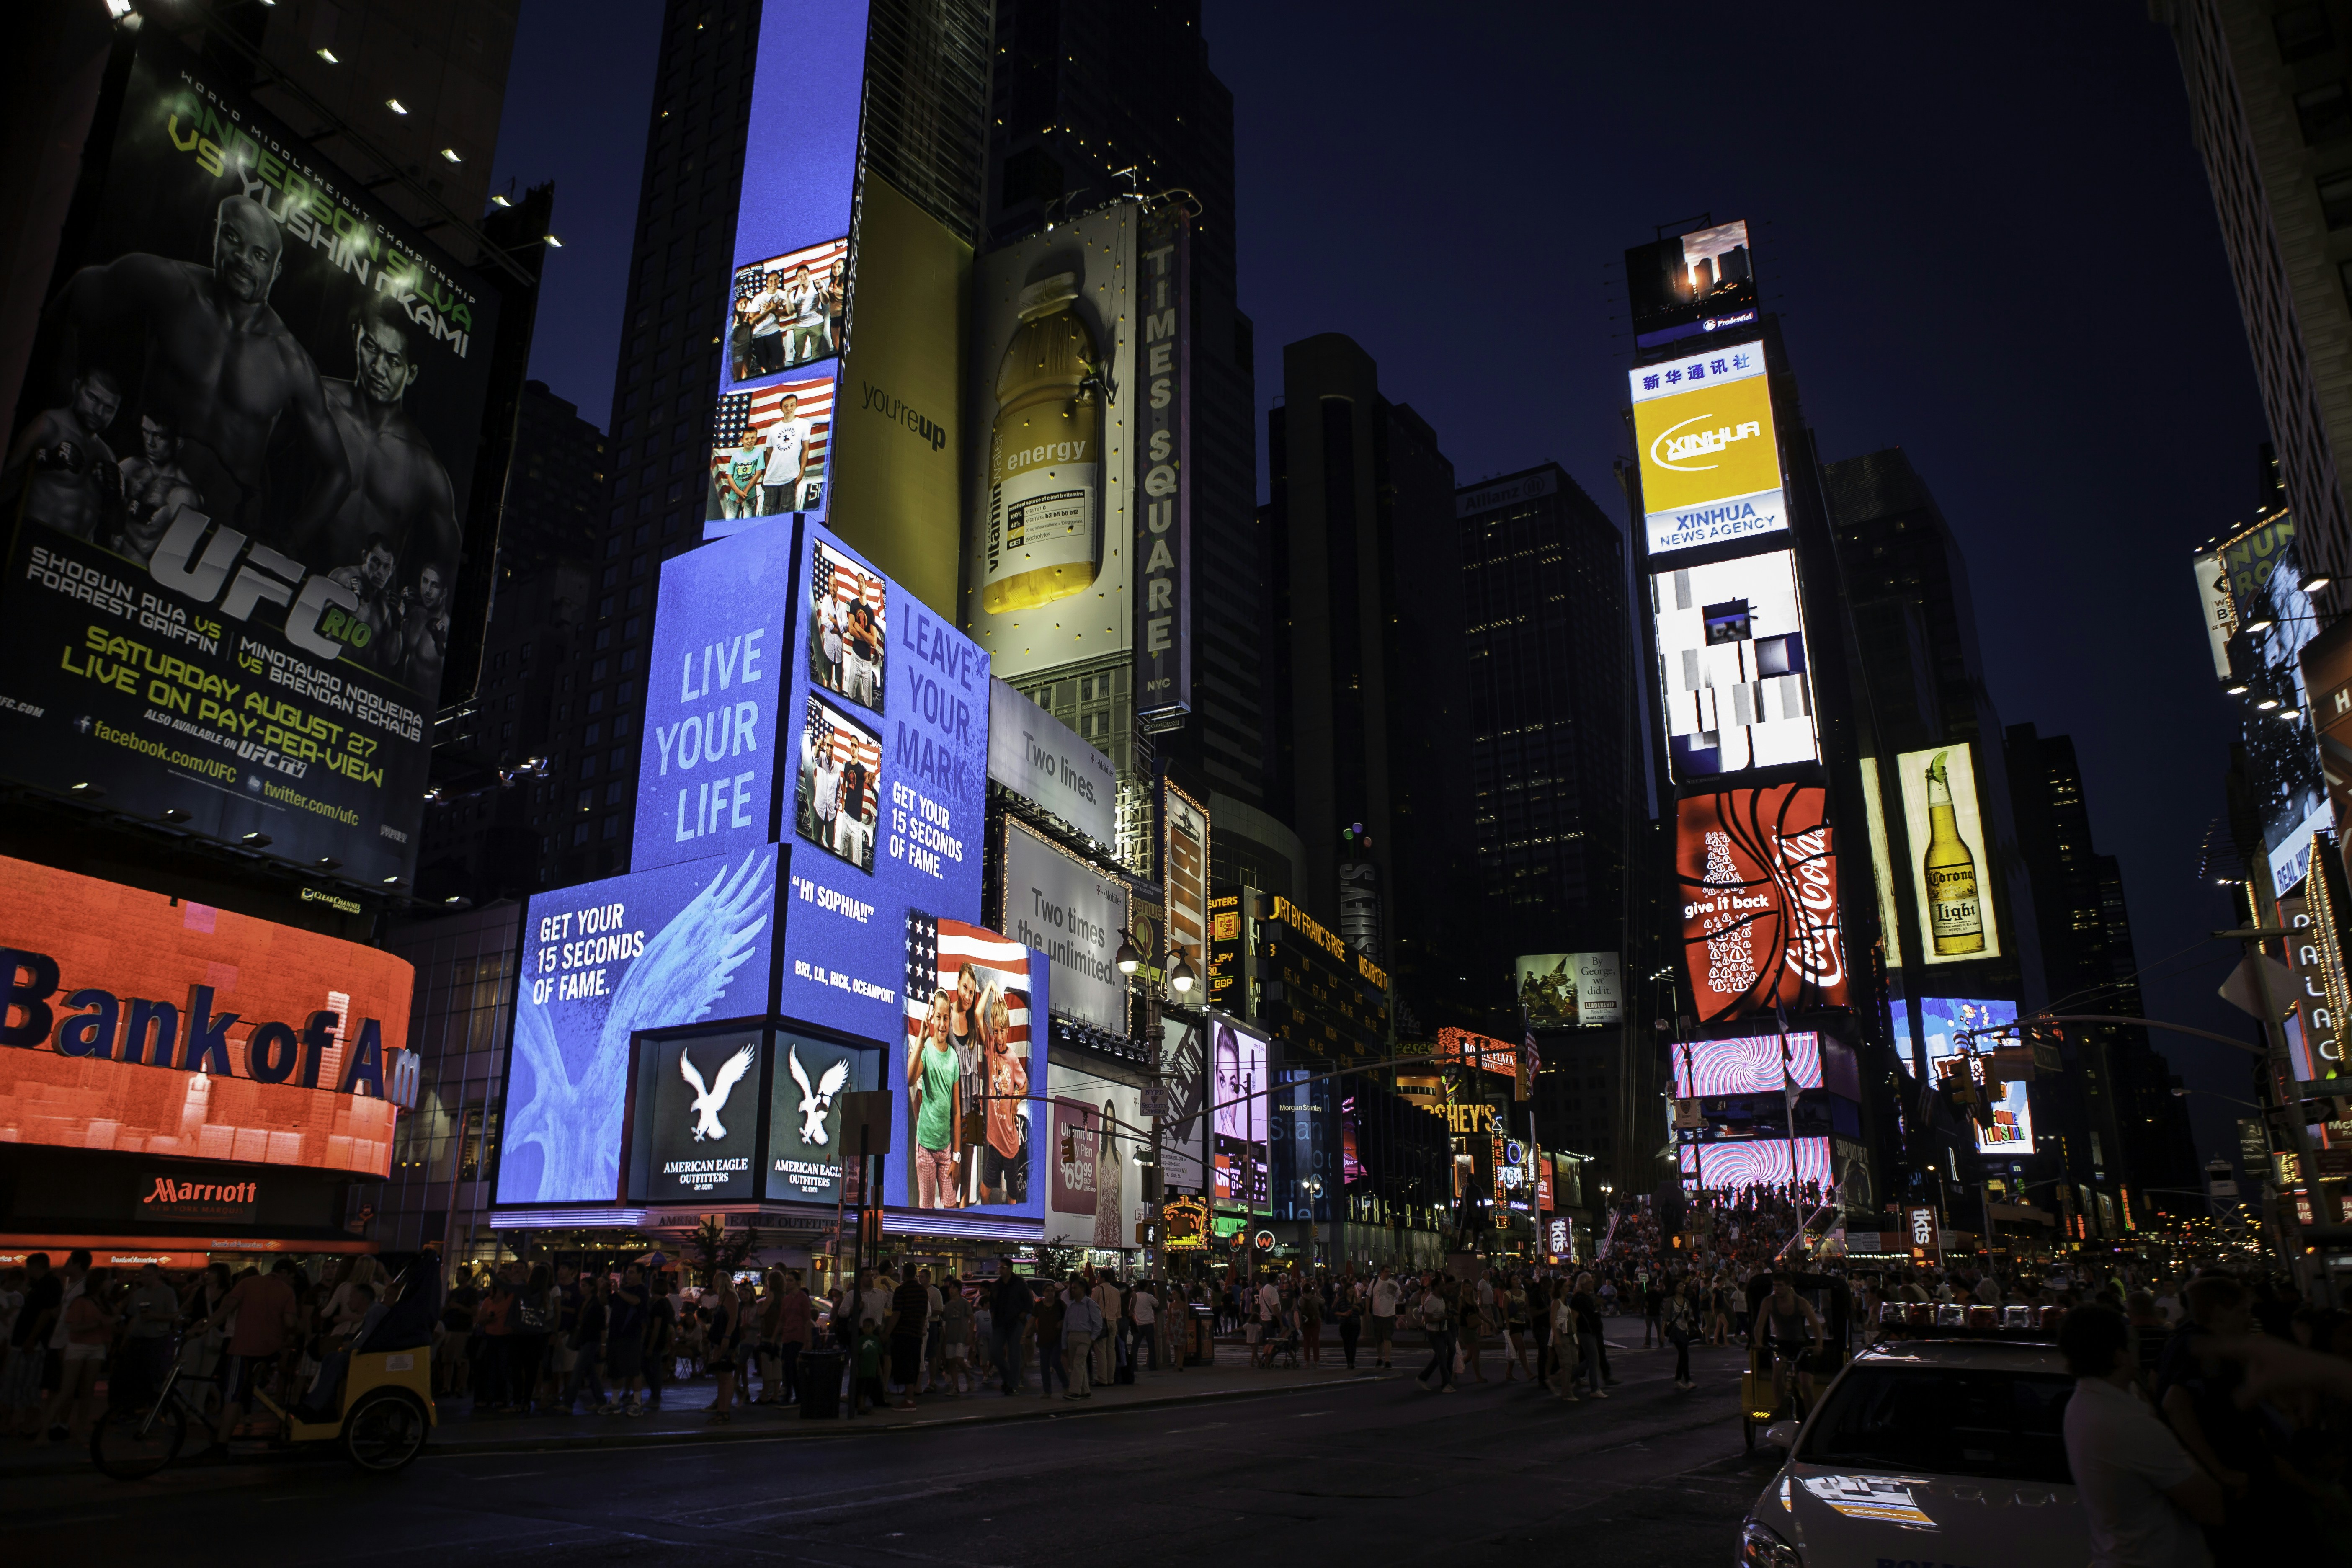 Times Square at night, wonderful. The most perfect example of the city that never sleeps.